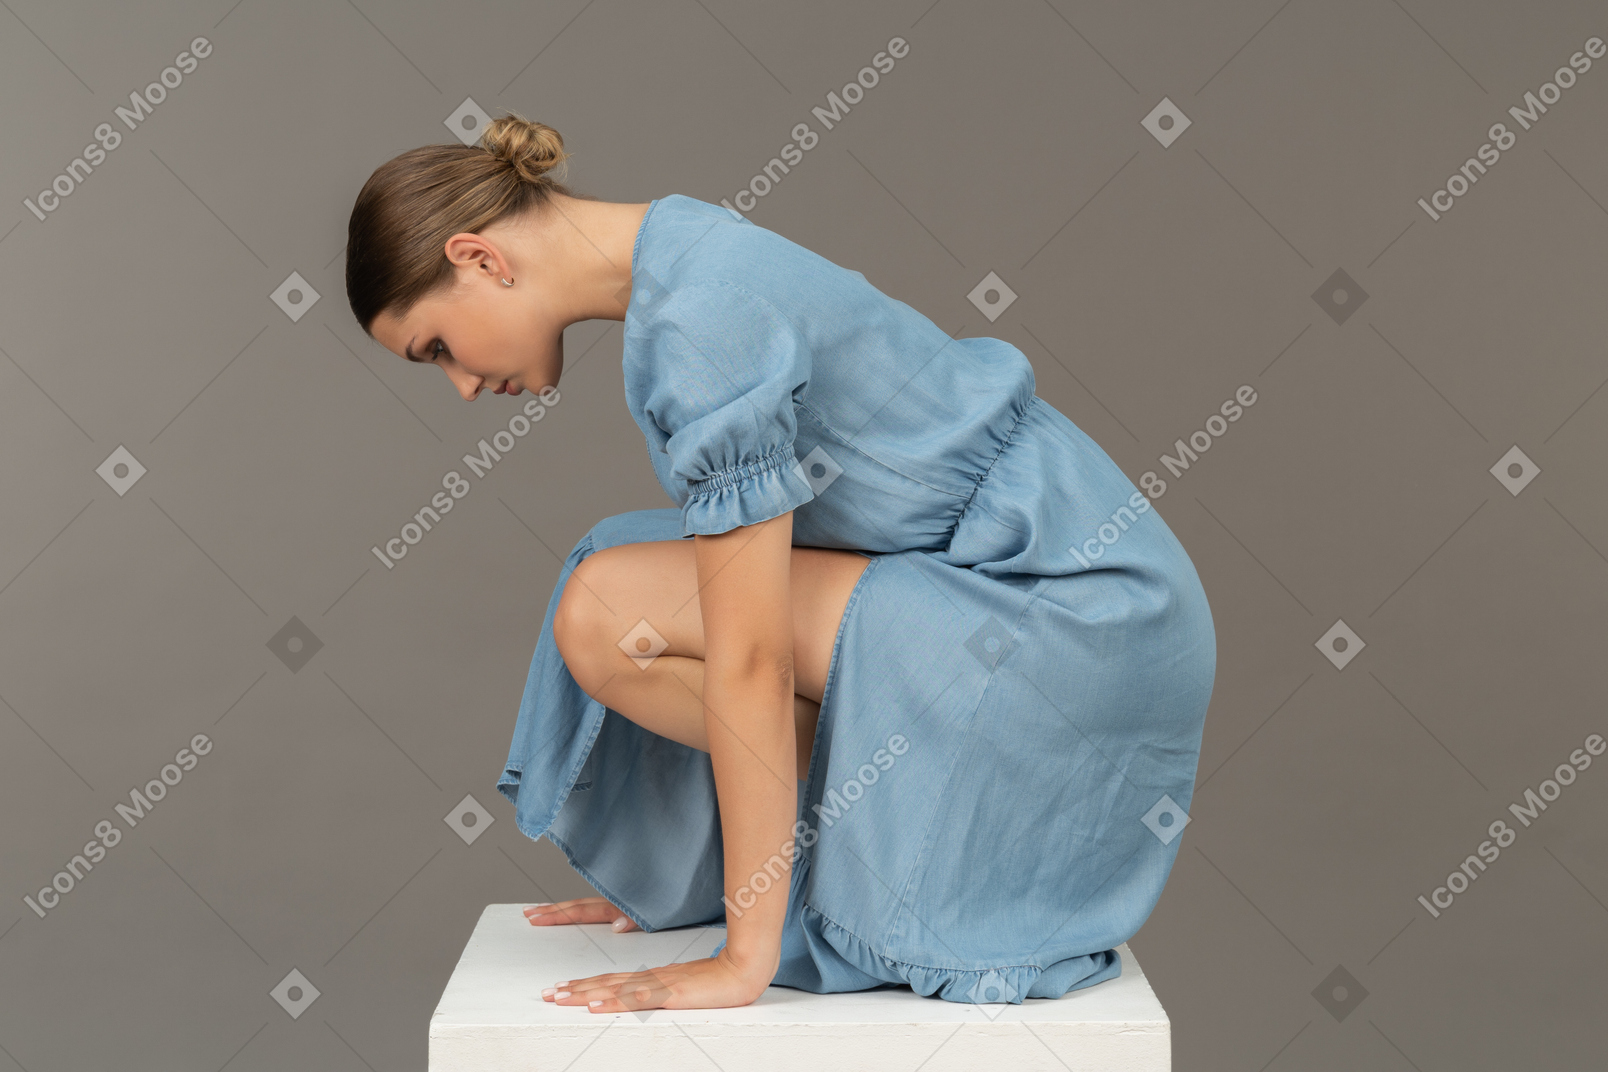 Side view of young woman squatting on cube